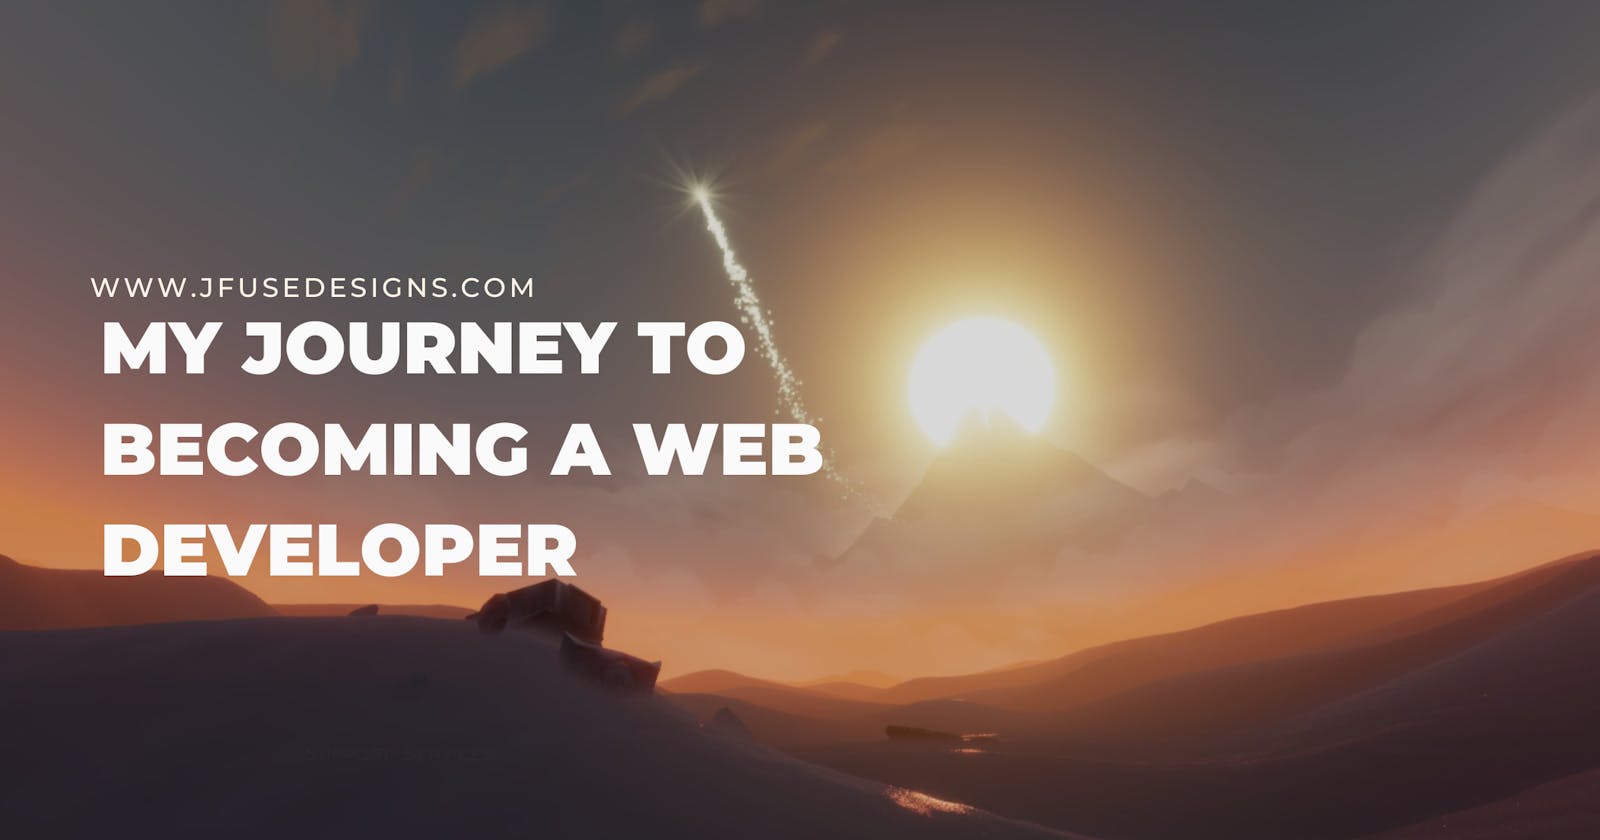 My Journey to becoming a Web Developer